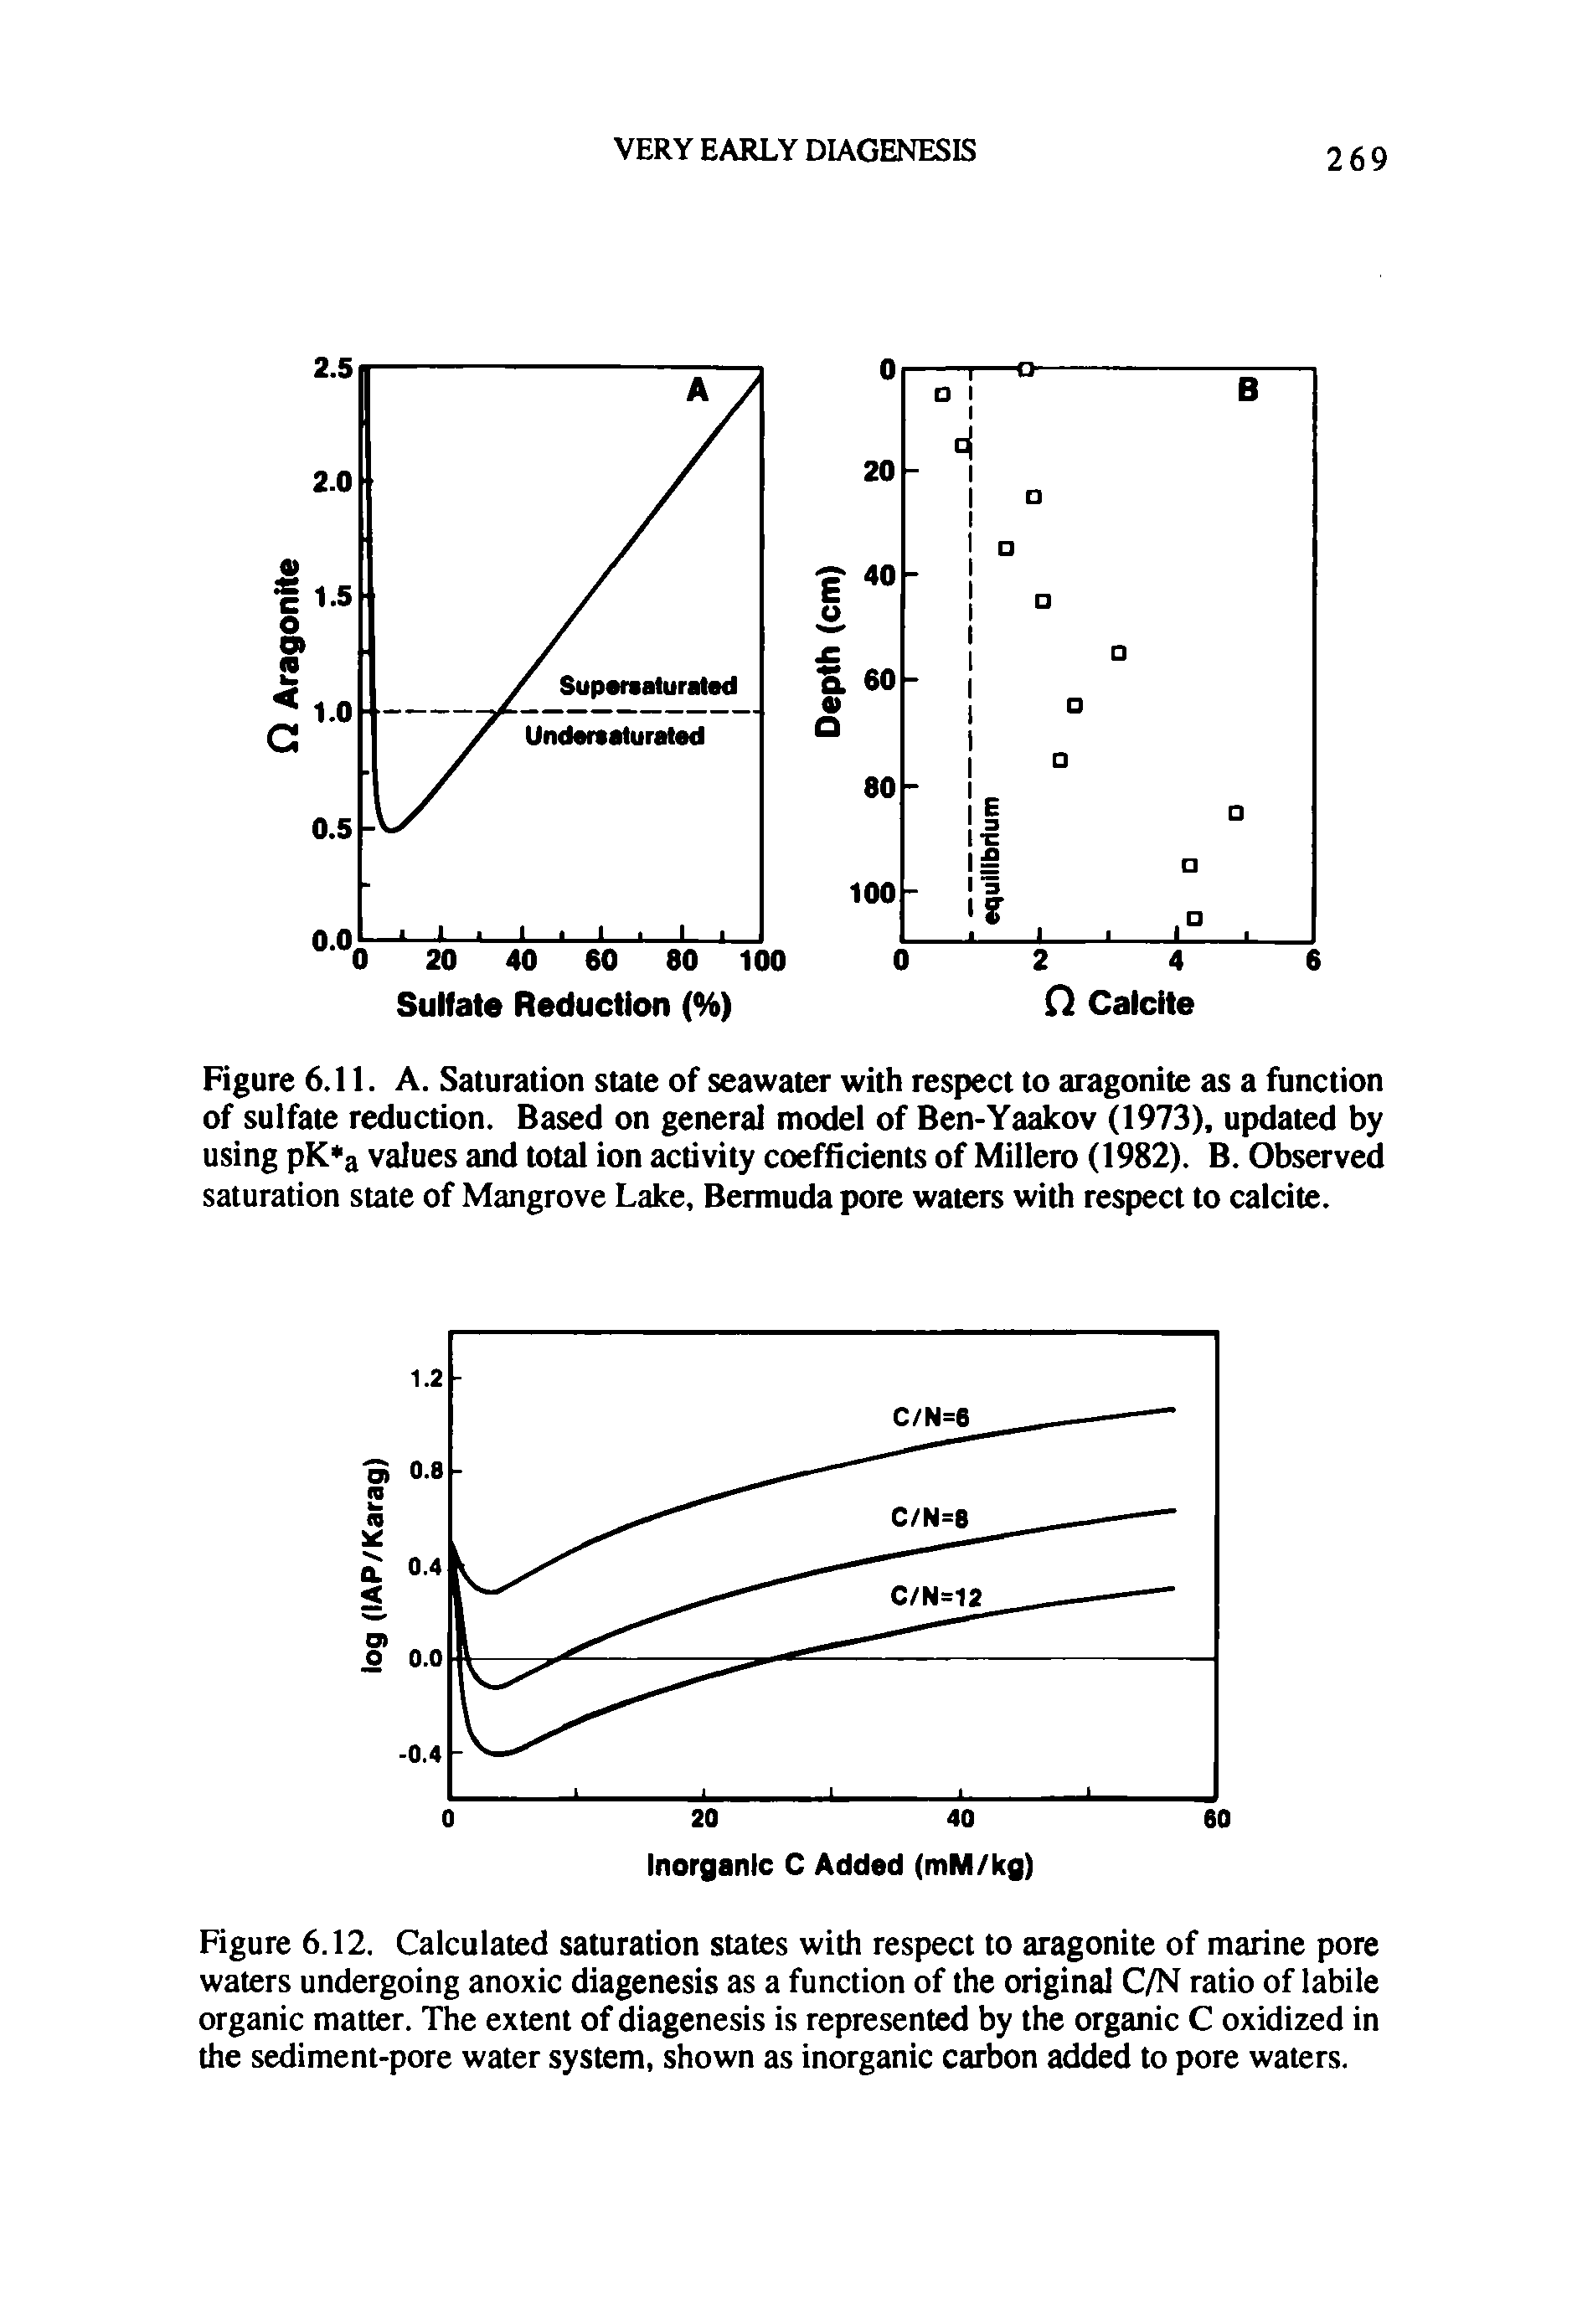 Figure 6.11. A. Saturation state of seawater with respect to aragonite as a function of sulfate reduction. Based on general model of Ben-Yaakov (1973), updated by using pK a values and total ion activity coefficients of Millero (1982). B. Observed saturation state of Mangrove Lake, Bermuda pore waters with respect to calcite.